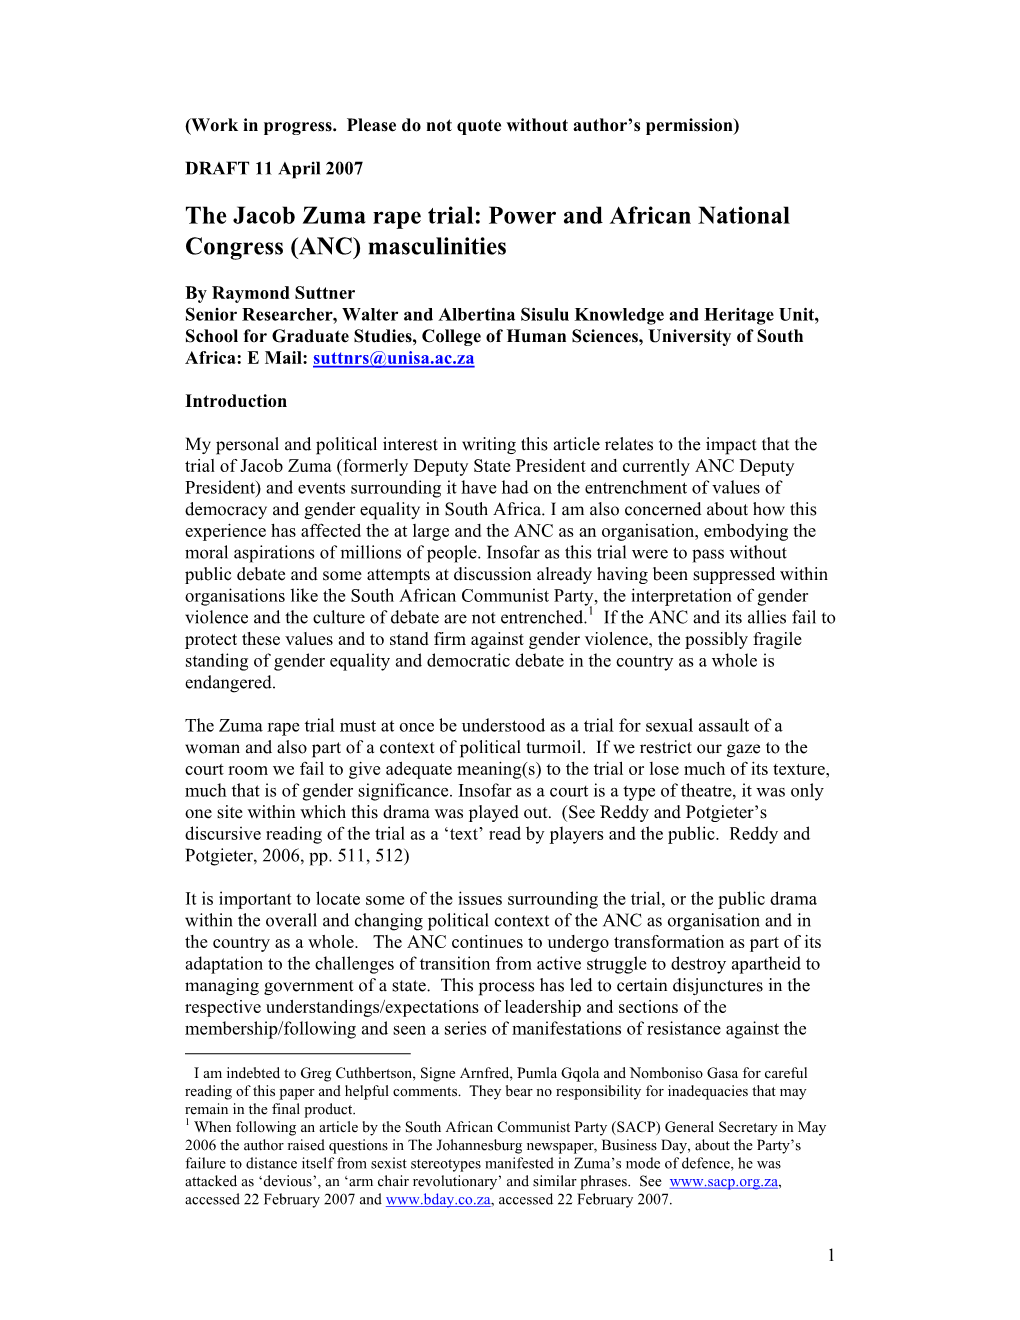 The Jacob Zuma Rape Trial: Power and African National ∗ Congress (ANC) Masculinities ∗∗